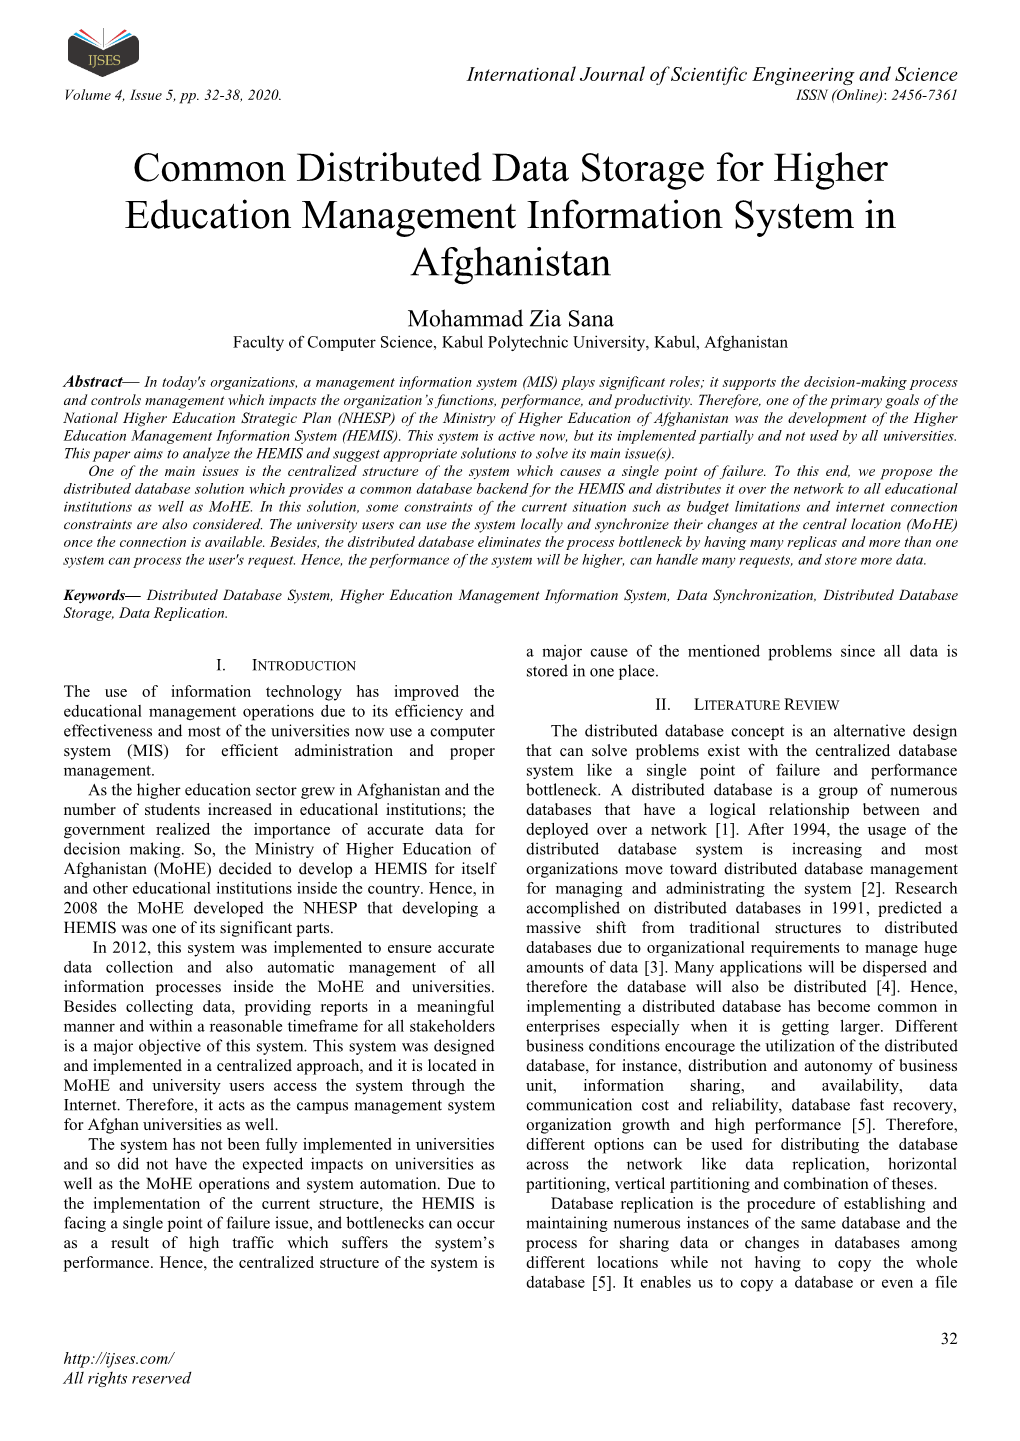 Common Distributed Data Storage for Higher Education Management Information System in Afghanistan